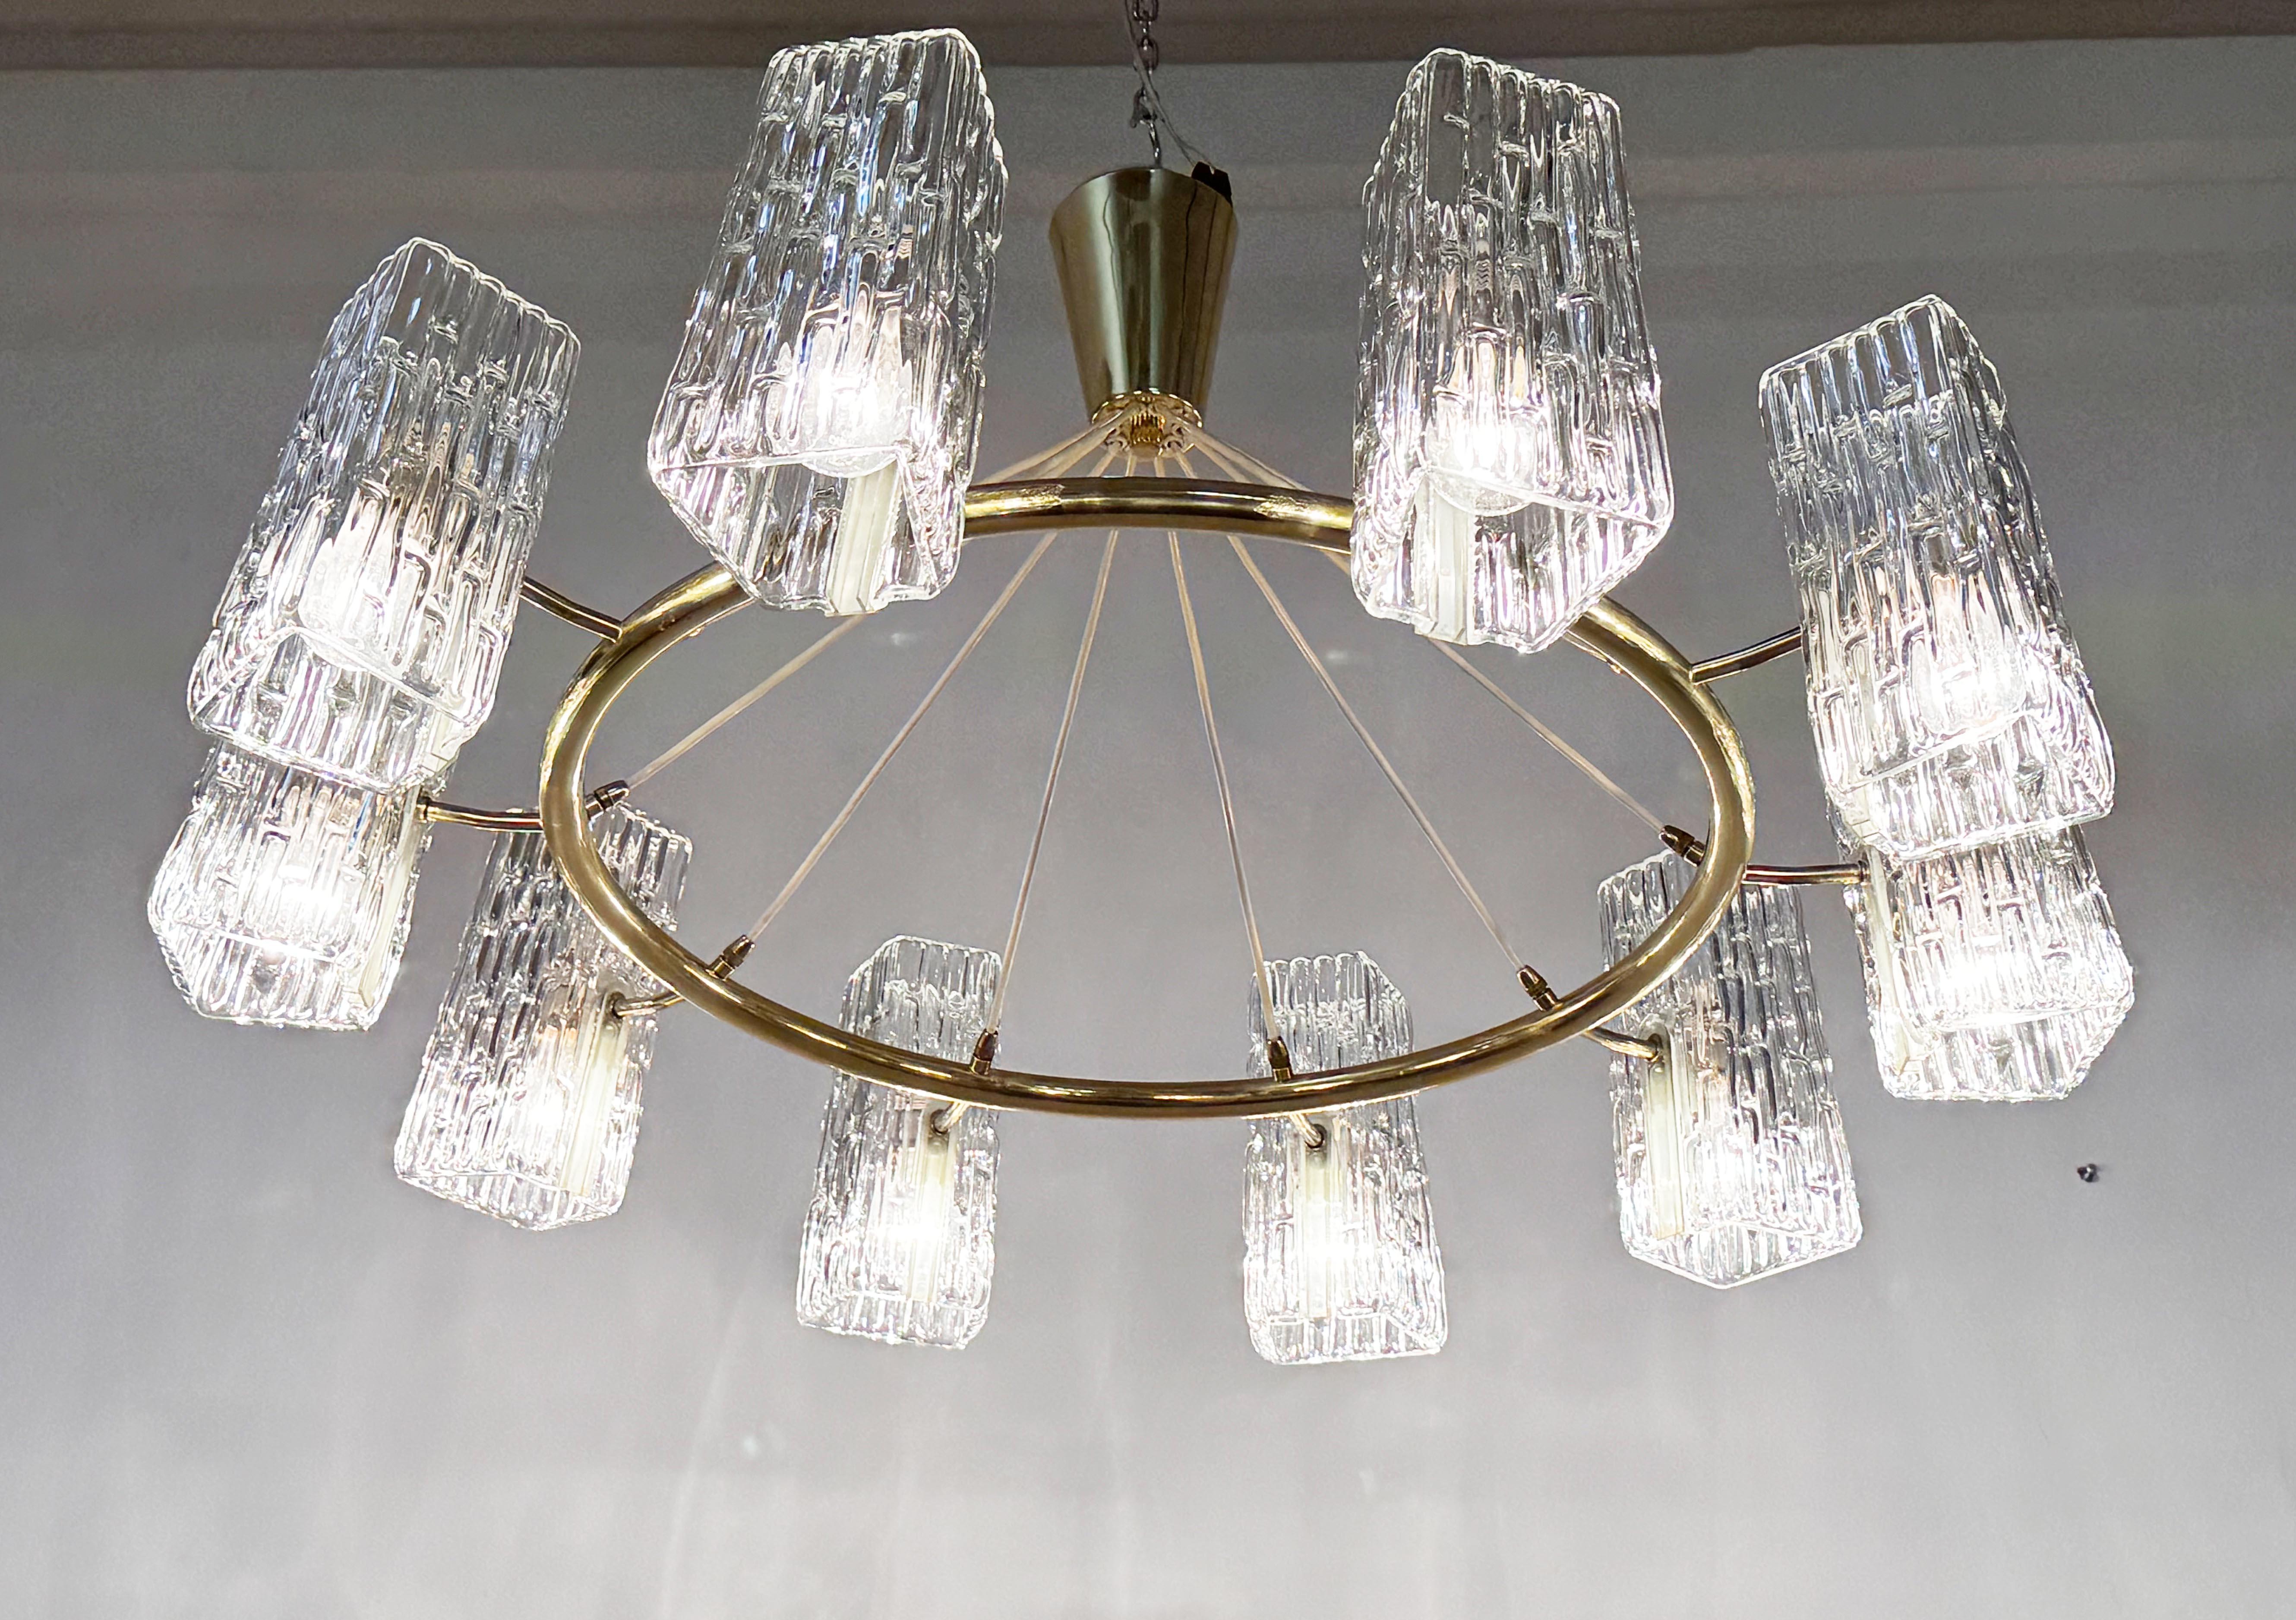 Huge Midcentury Brass Chandelier With Pressed Glass Shades By Rupert Nikoll For Sale 4